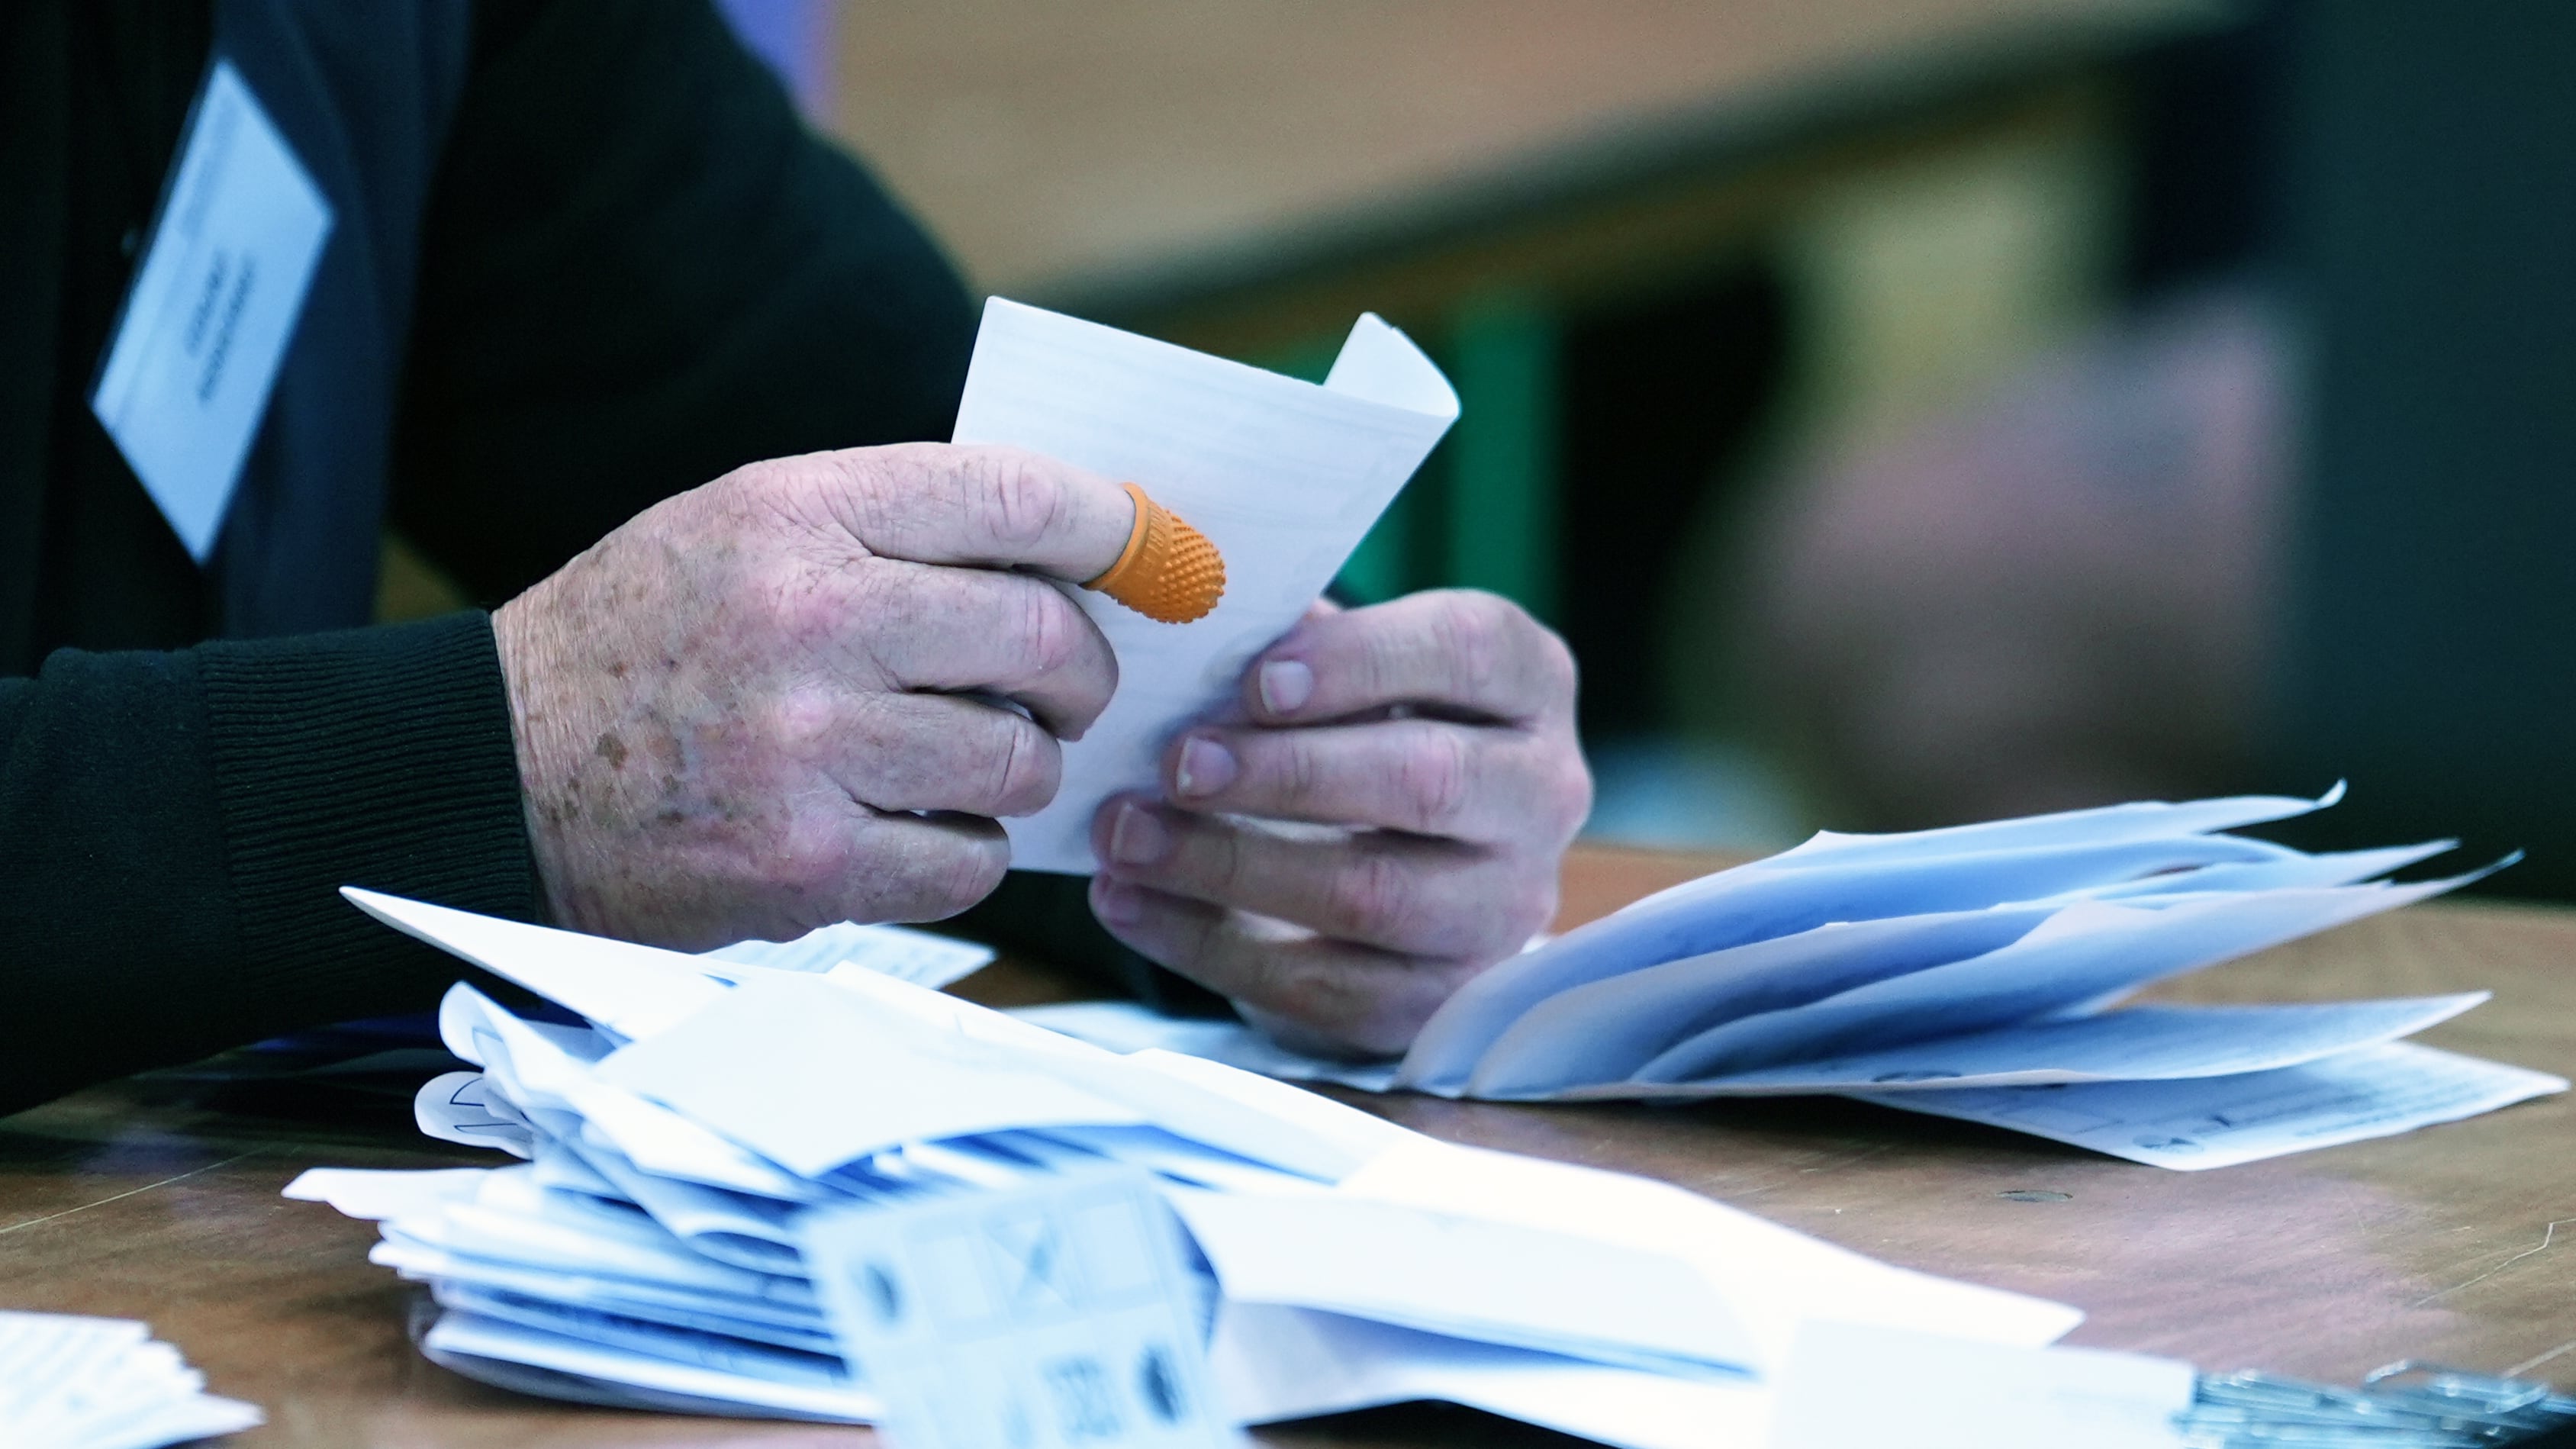 Every constituency in the UK is due to declare their General Election result overnight